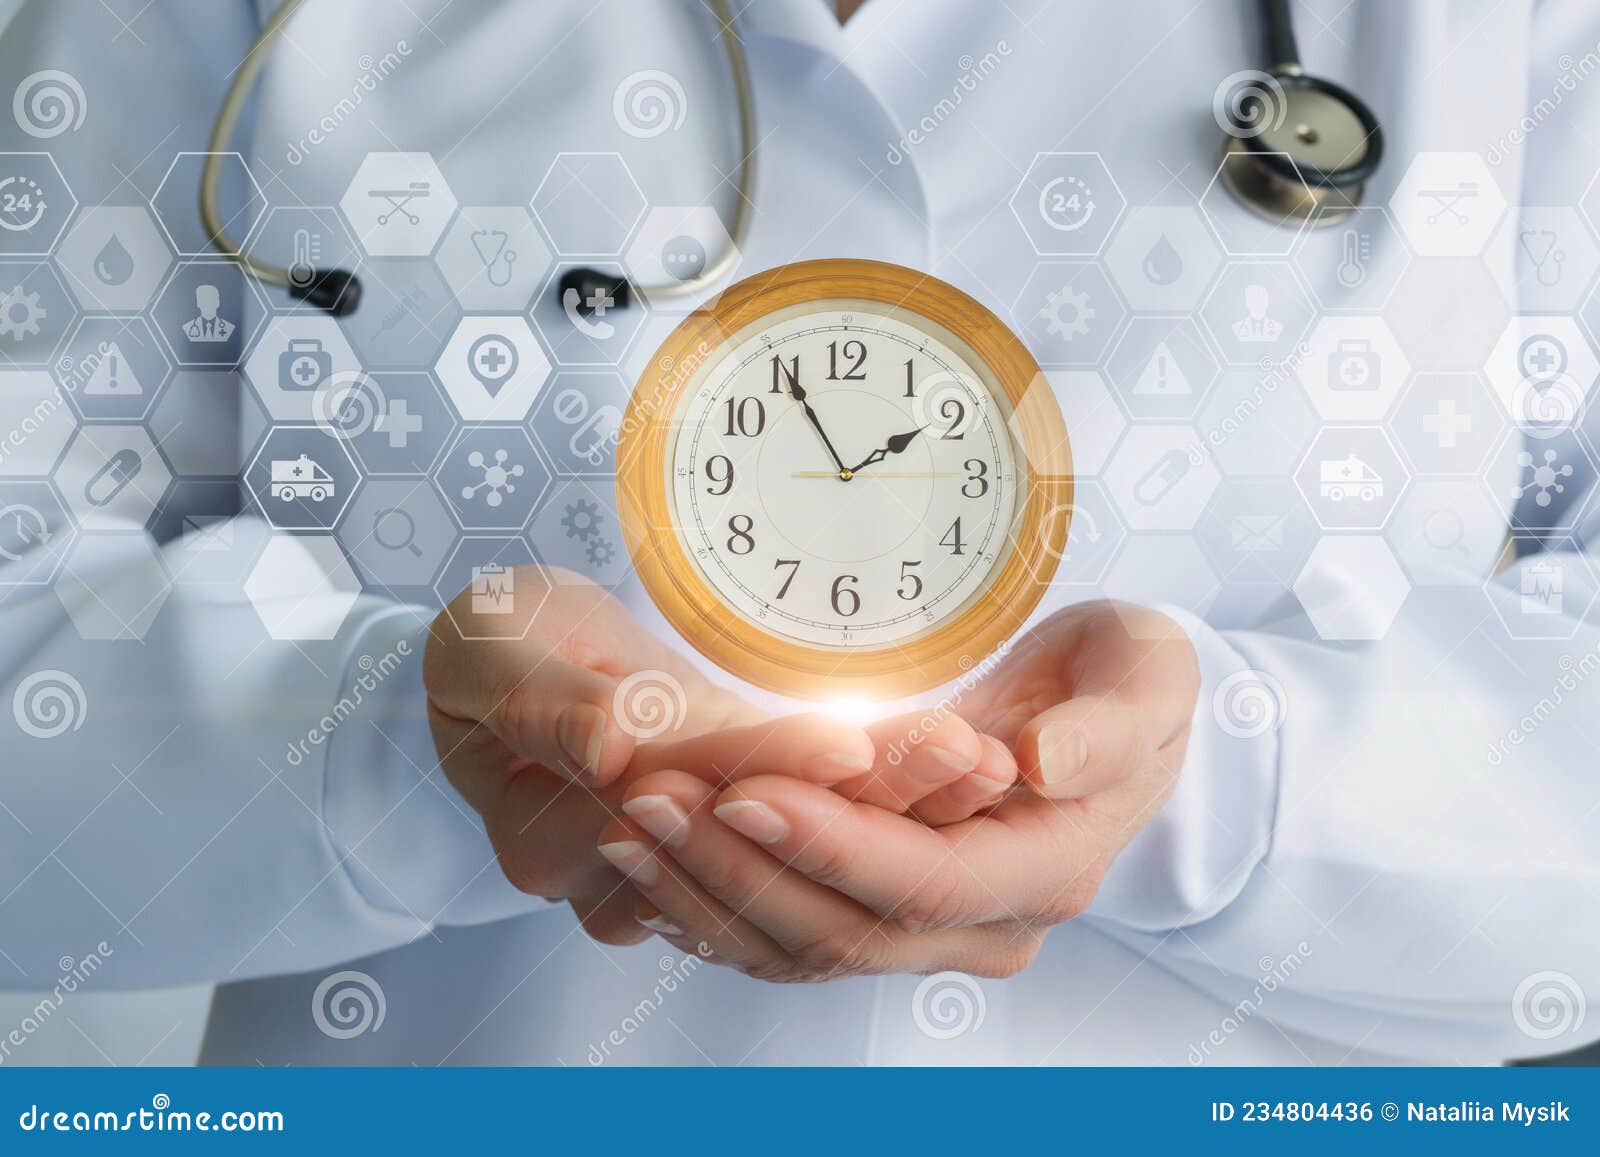 doctor maintains a clock